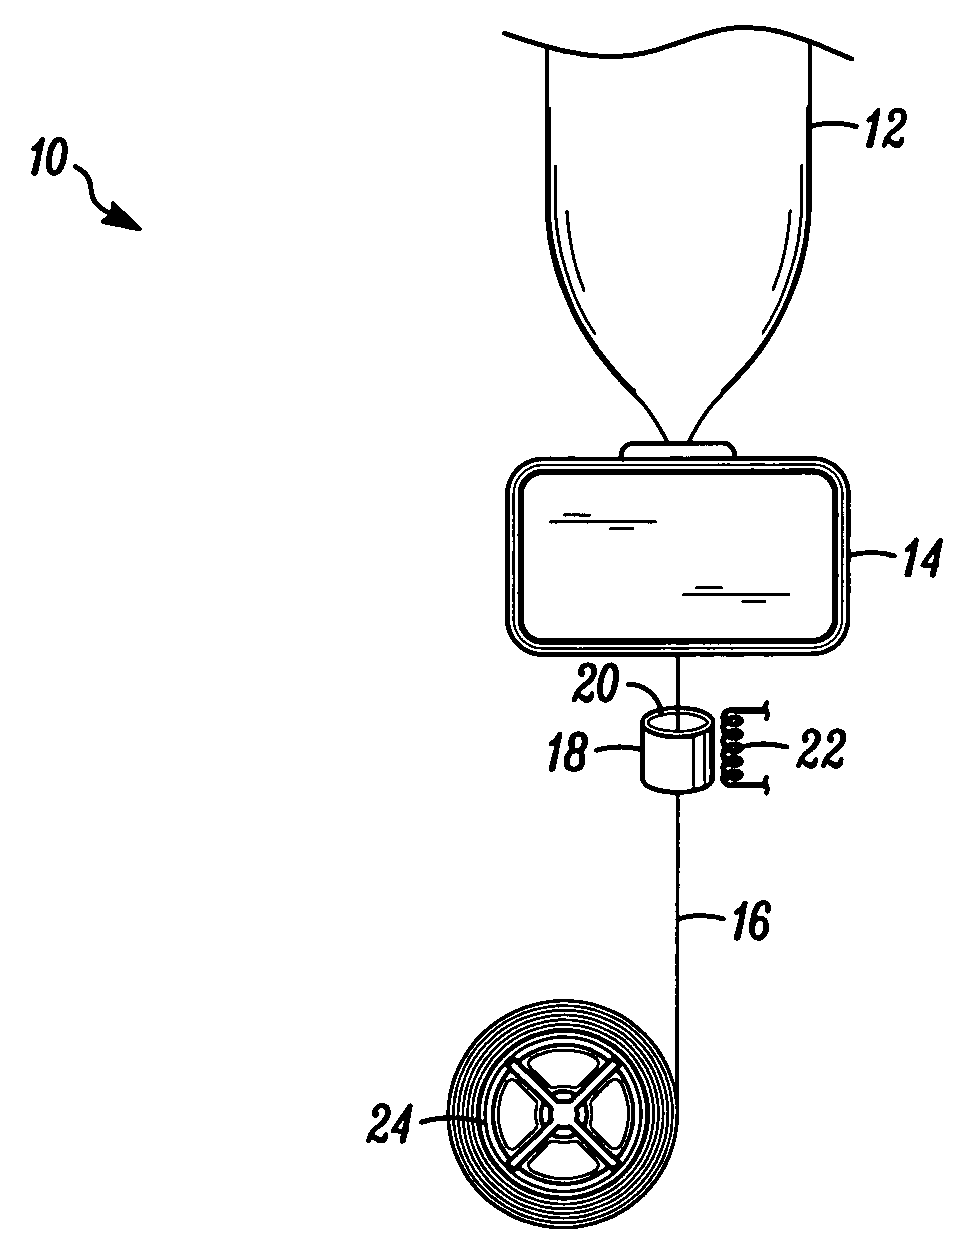 Filament with easily removed protective coating and methods for stripping the same